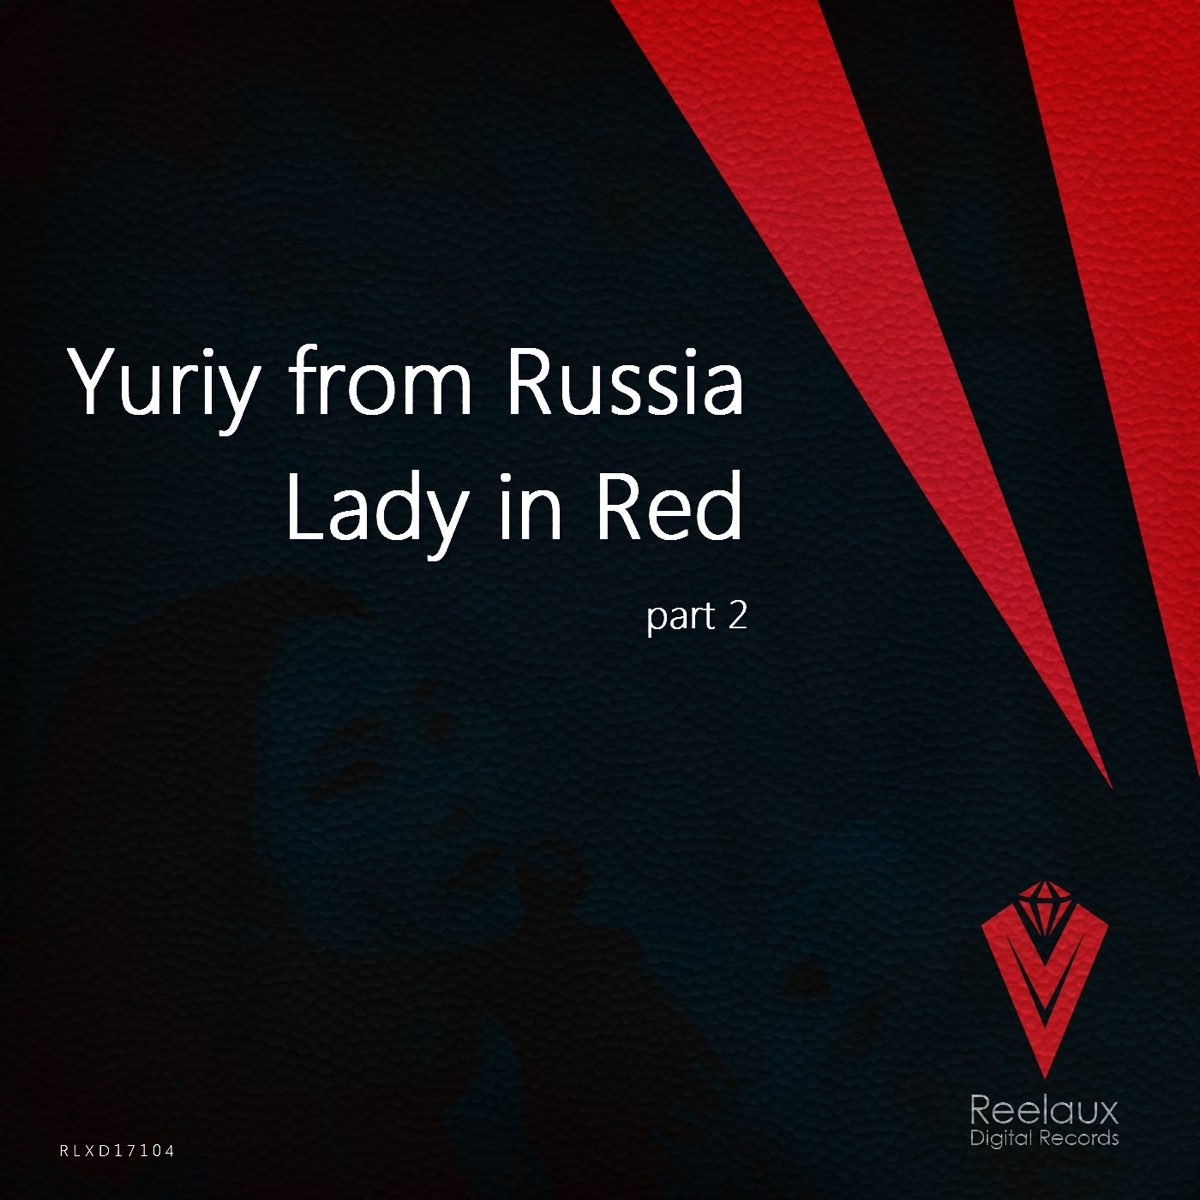 Red original mix. Альбом Lady in Red. Be in the Red. Red Part of me. Lady in Red текст.